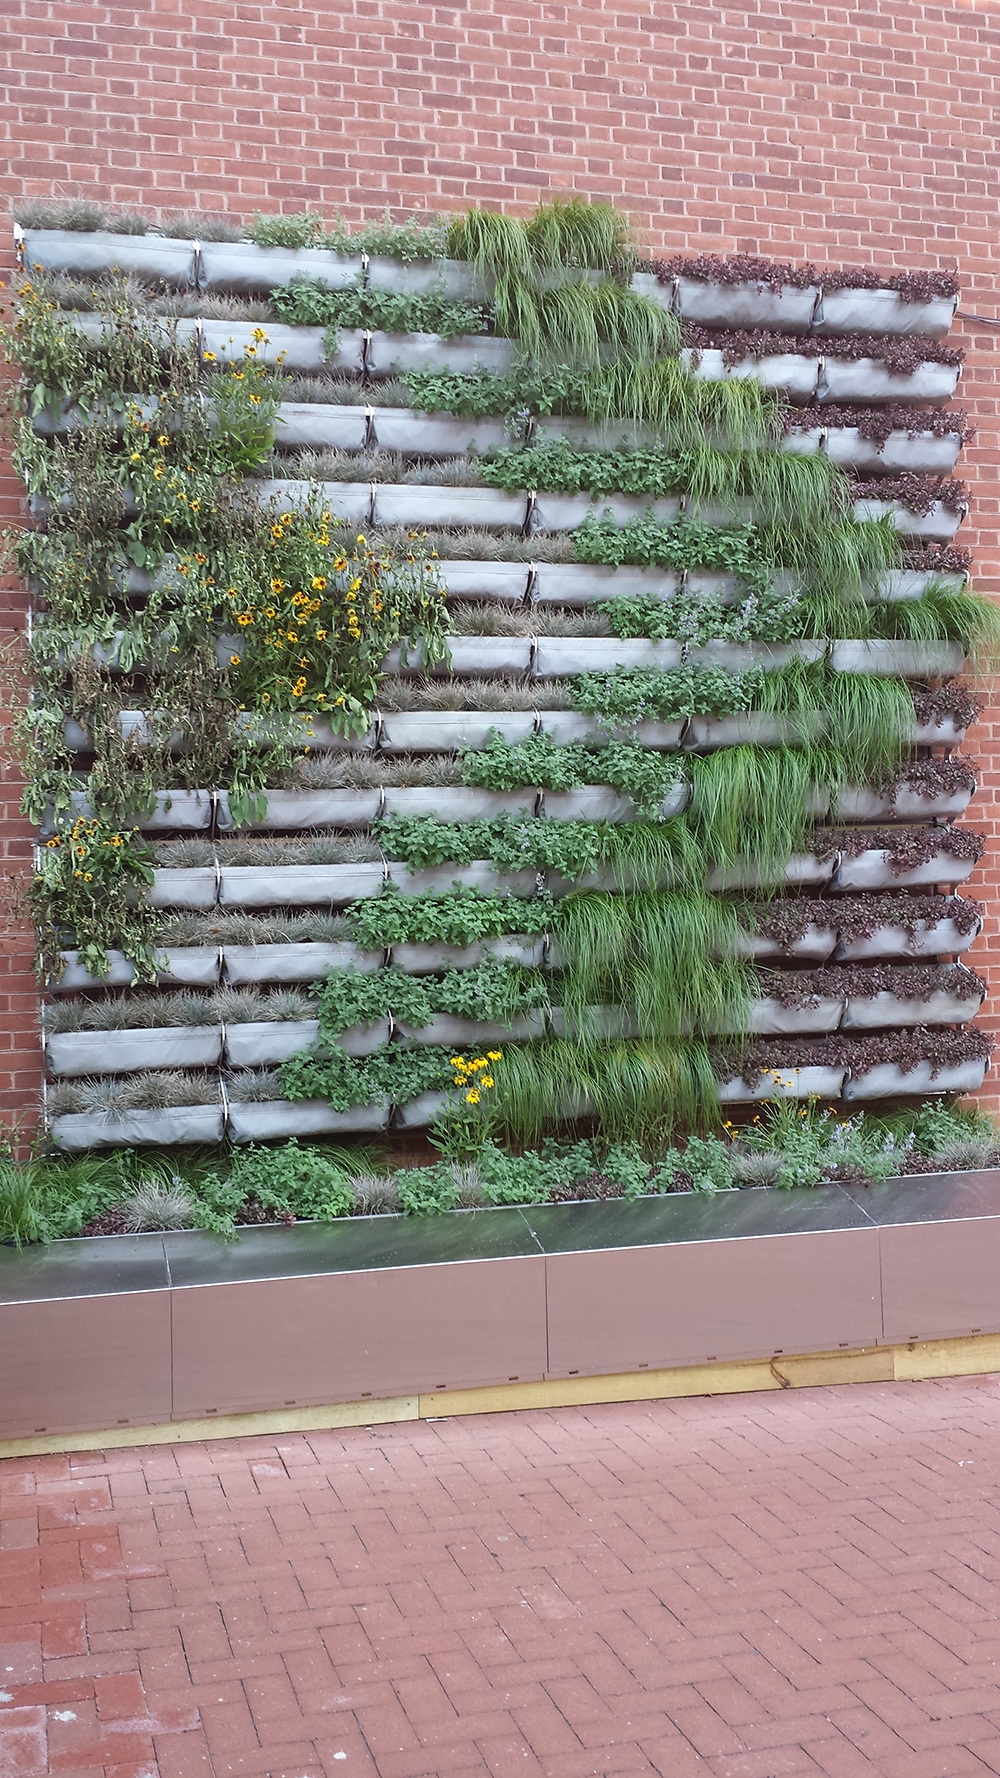 A new “living wall” at 3rd and Walnut acts as billboard for green tools